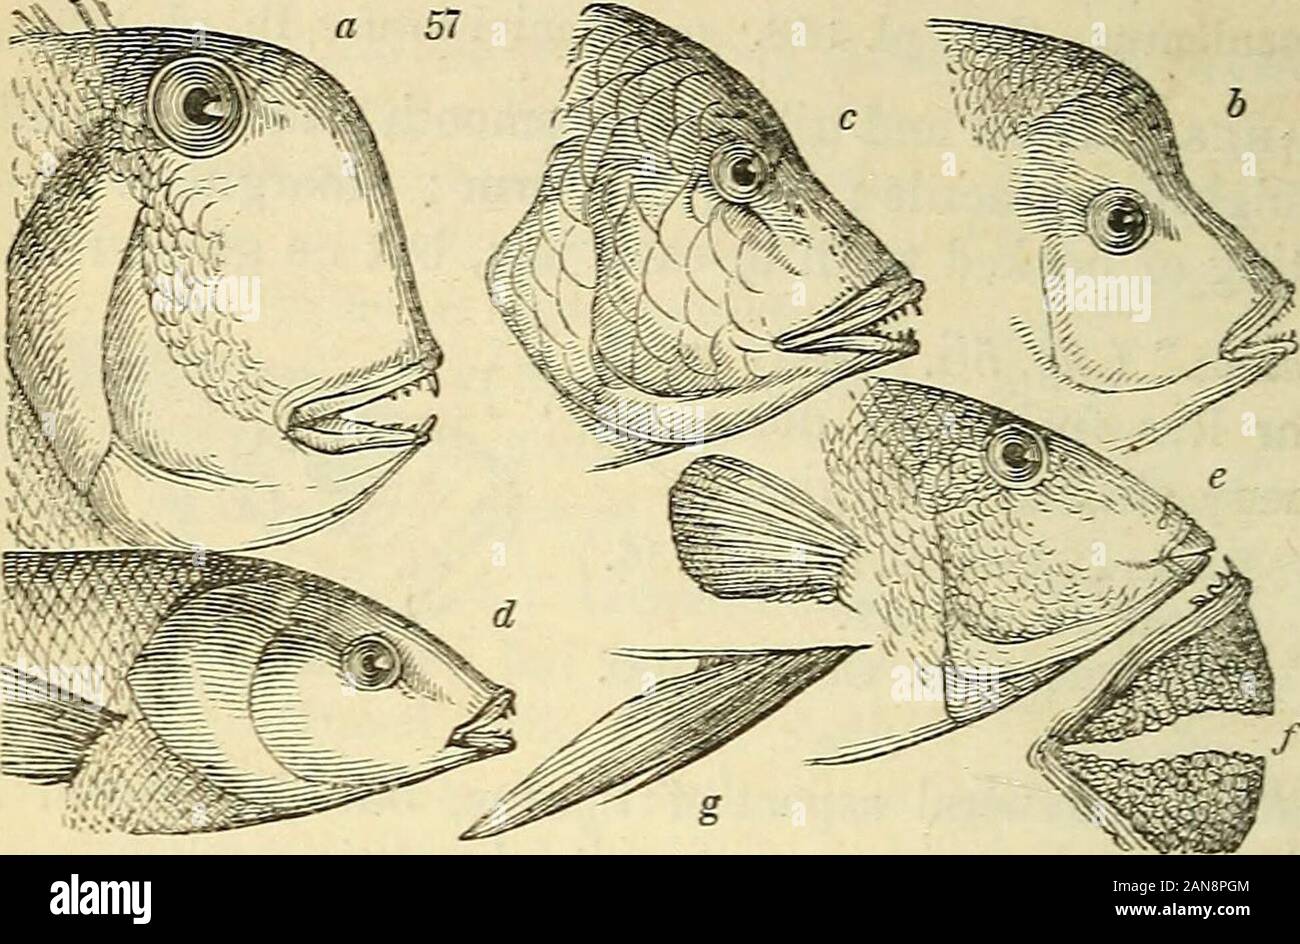 The natural history of fishes, amphibians, & reptiles, or monocardian animals . e lower of which is the largest; dorsal finslightly emarginate. D. vulgaris. Bloch, pi. 268. Nemipterus Sw. Jaws equal; dorsal fin broad, ex-tending the whole length of the back, of equal rays,excepting the first, which is prolonged into a fila-ment; caudal forked j another filament terminatesthe exterior upper ray ; ventral fin long and pointed. N. filamentosus. Cuv. pi. 155. Oblata Cuv. General aspect of Sparus, but the mouthopens rather obliquely, and the lower jaw is longest. O. melanura. Cuv. pi. 162. bis. Asp Stock Photo